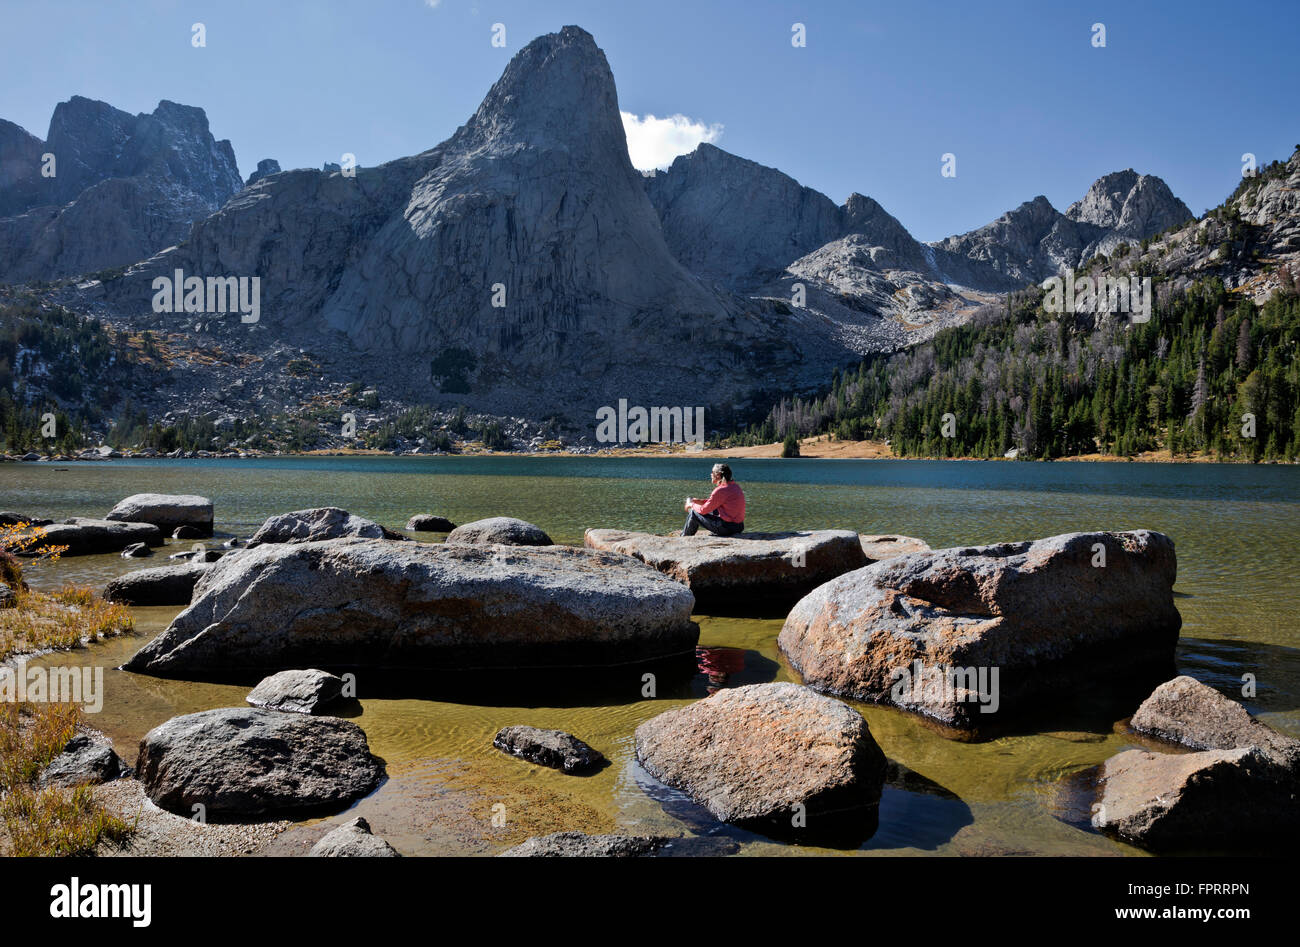 WY01342-00...WYOMING - Hiker relaxing on the shores of Lonesome Lake in the Cirque of Towers area of the Wind River Range. Stock Photo